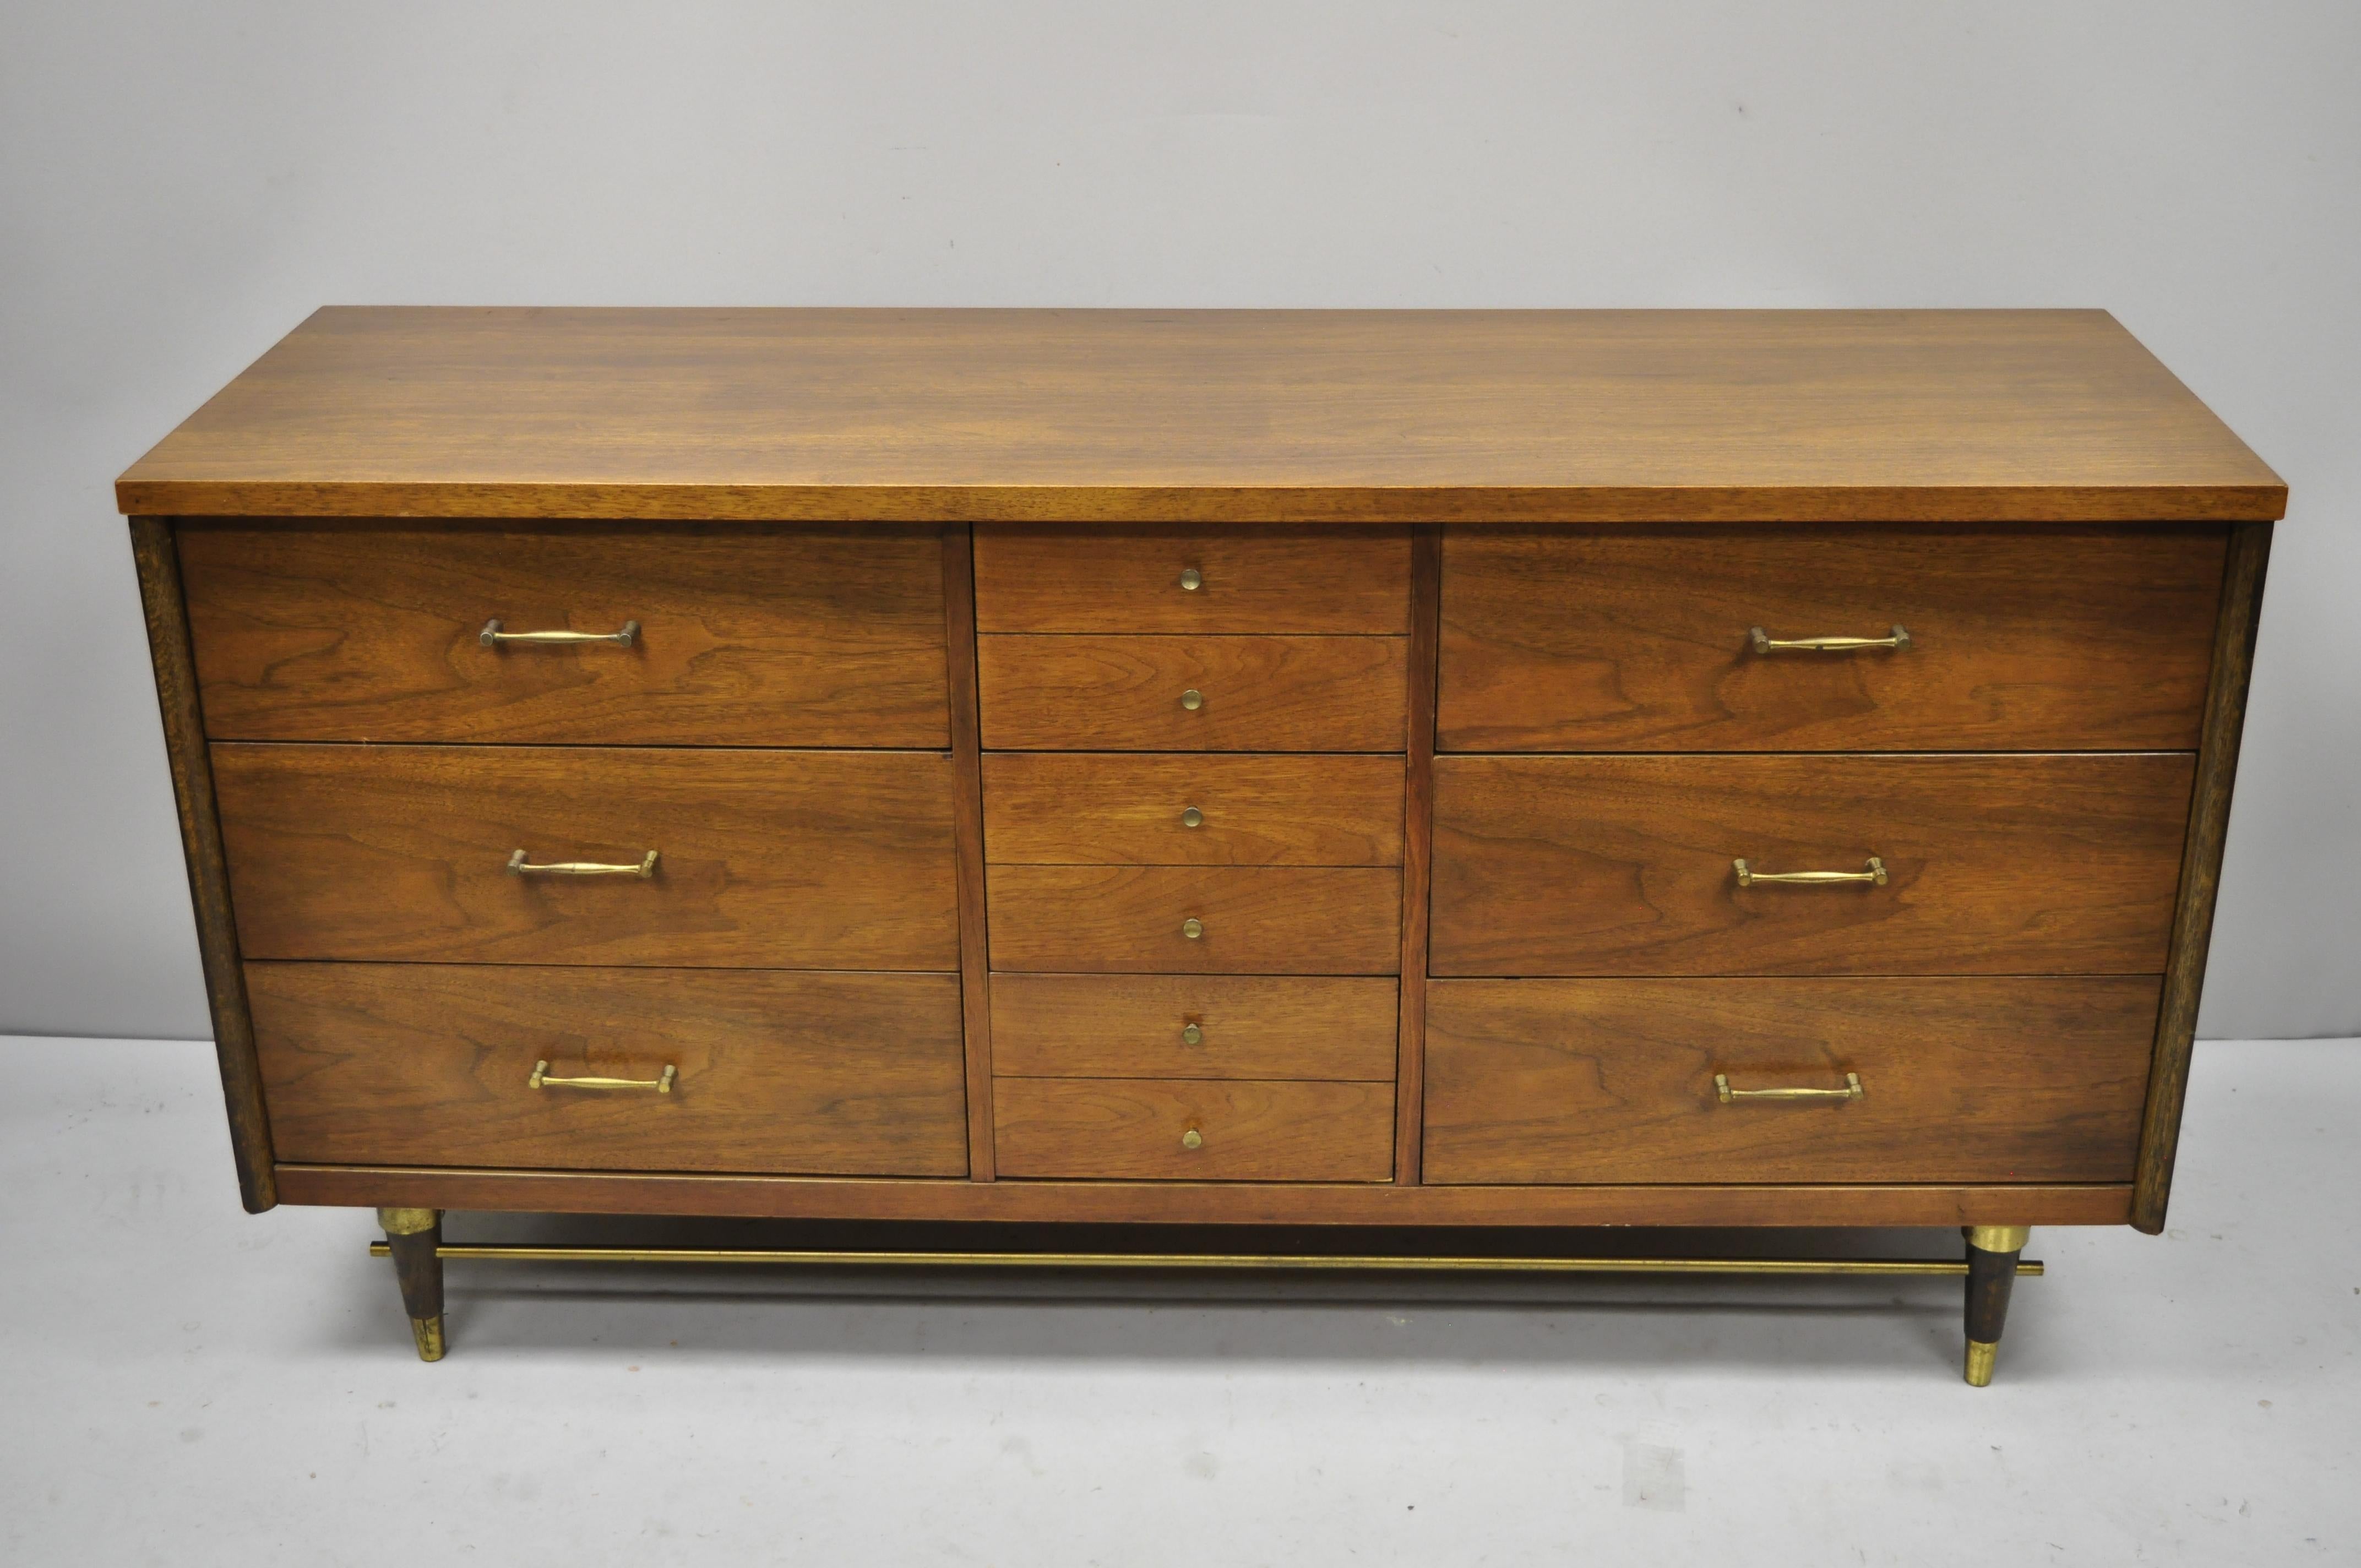 Vintage Mid-Century Modern walnut credenza with brass stretcher by Bassett. Item features beautiful wood grain, brass accents, original stamp, 9 dovetailed drawers, tapered legs, brass hardware, very nice vintage item, clean modernist lines, circa